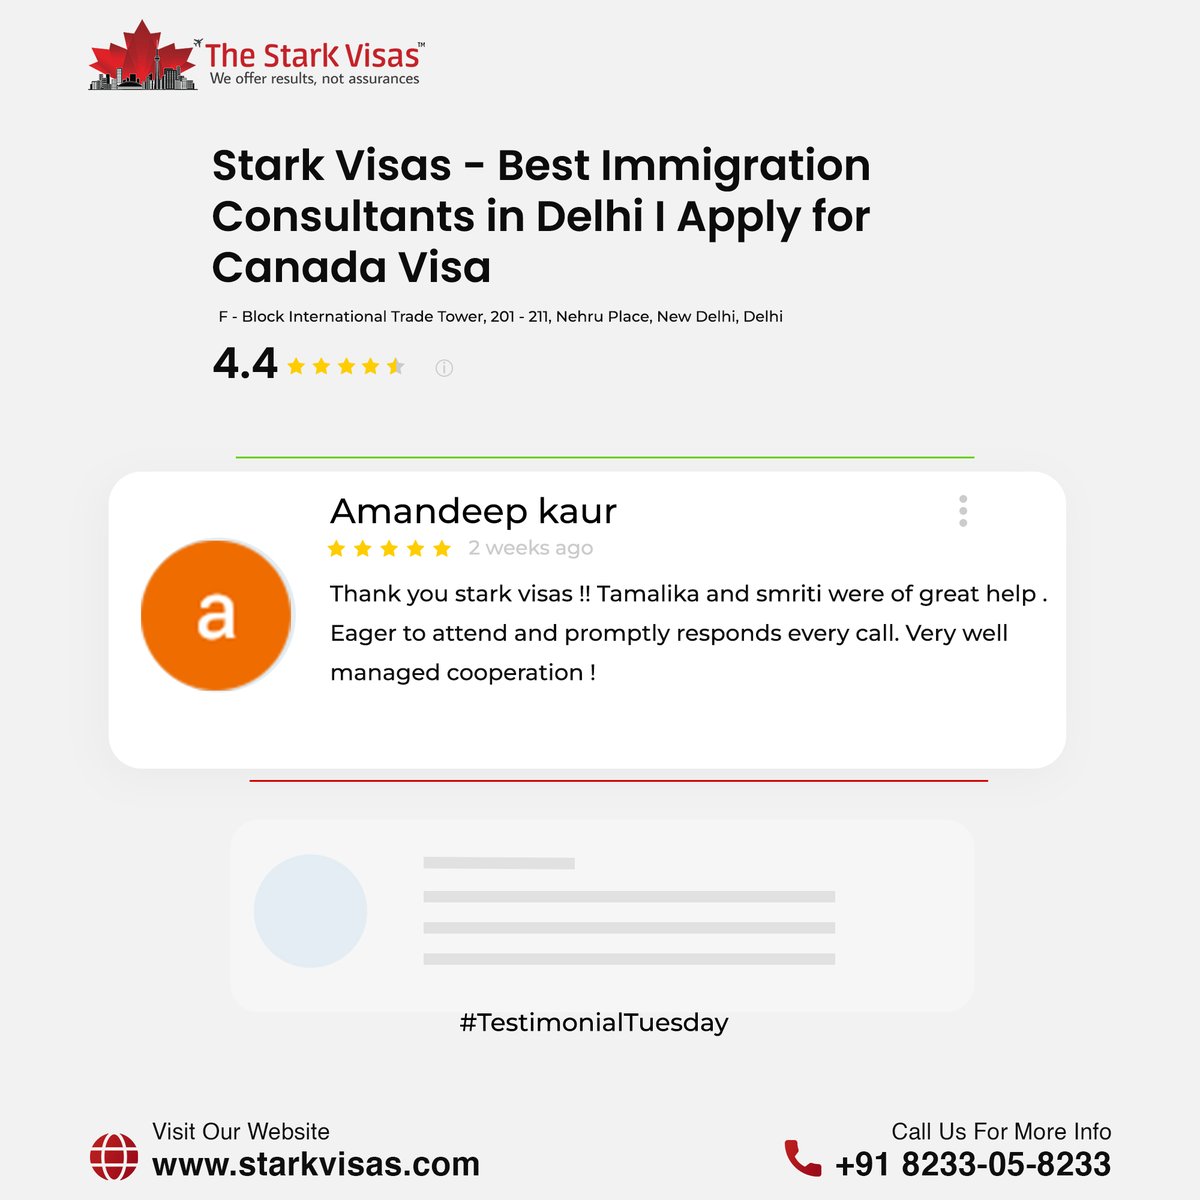 Congratulations to Amandeep Kaur on her journey to Canada! 

Your achievement in obtaining Permanent Residency is truly inspiring. 

#CanadaPR #Congratulations #ClientFeedback #HappyClient #TuesdayTestimonial #VisaSuccess #CanadaImmigration #StarkVisas #TheStarkVisas